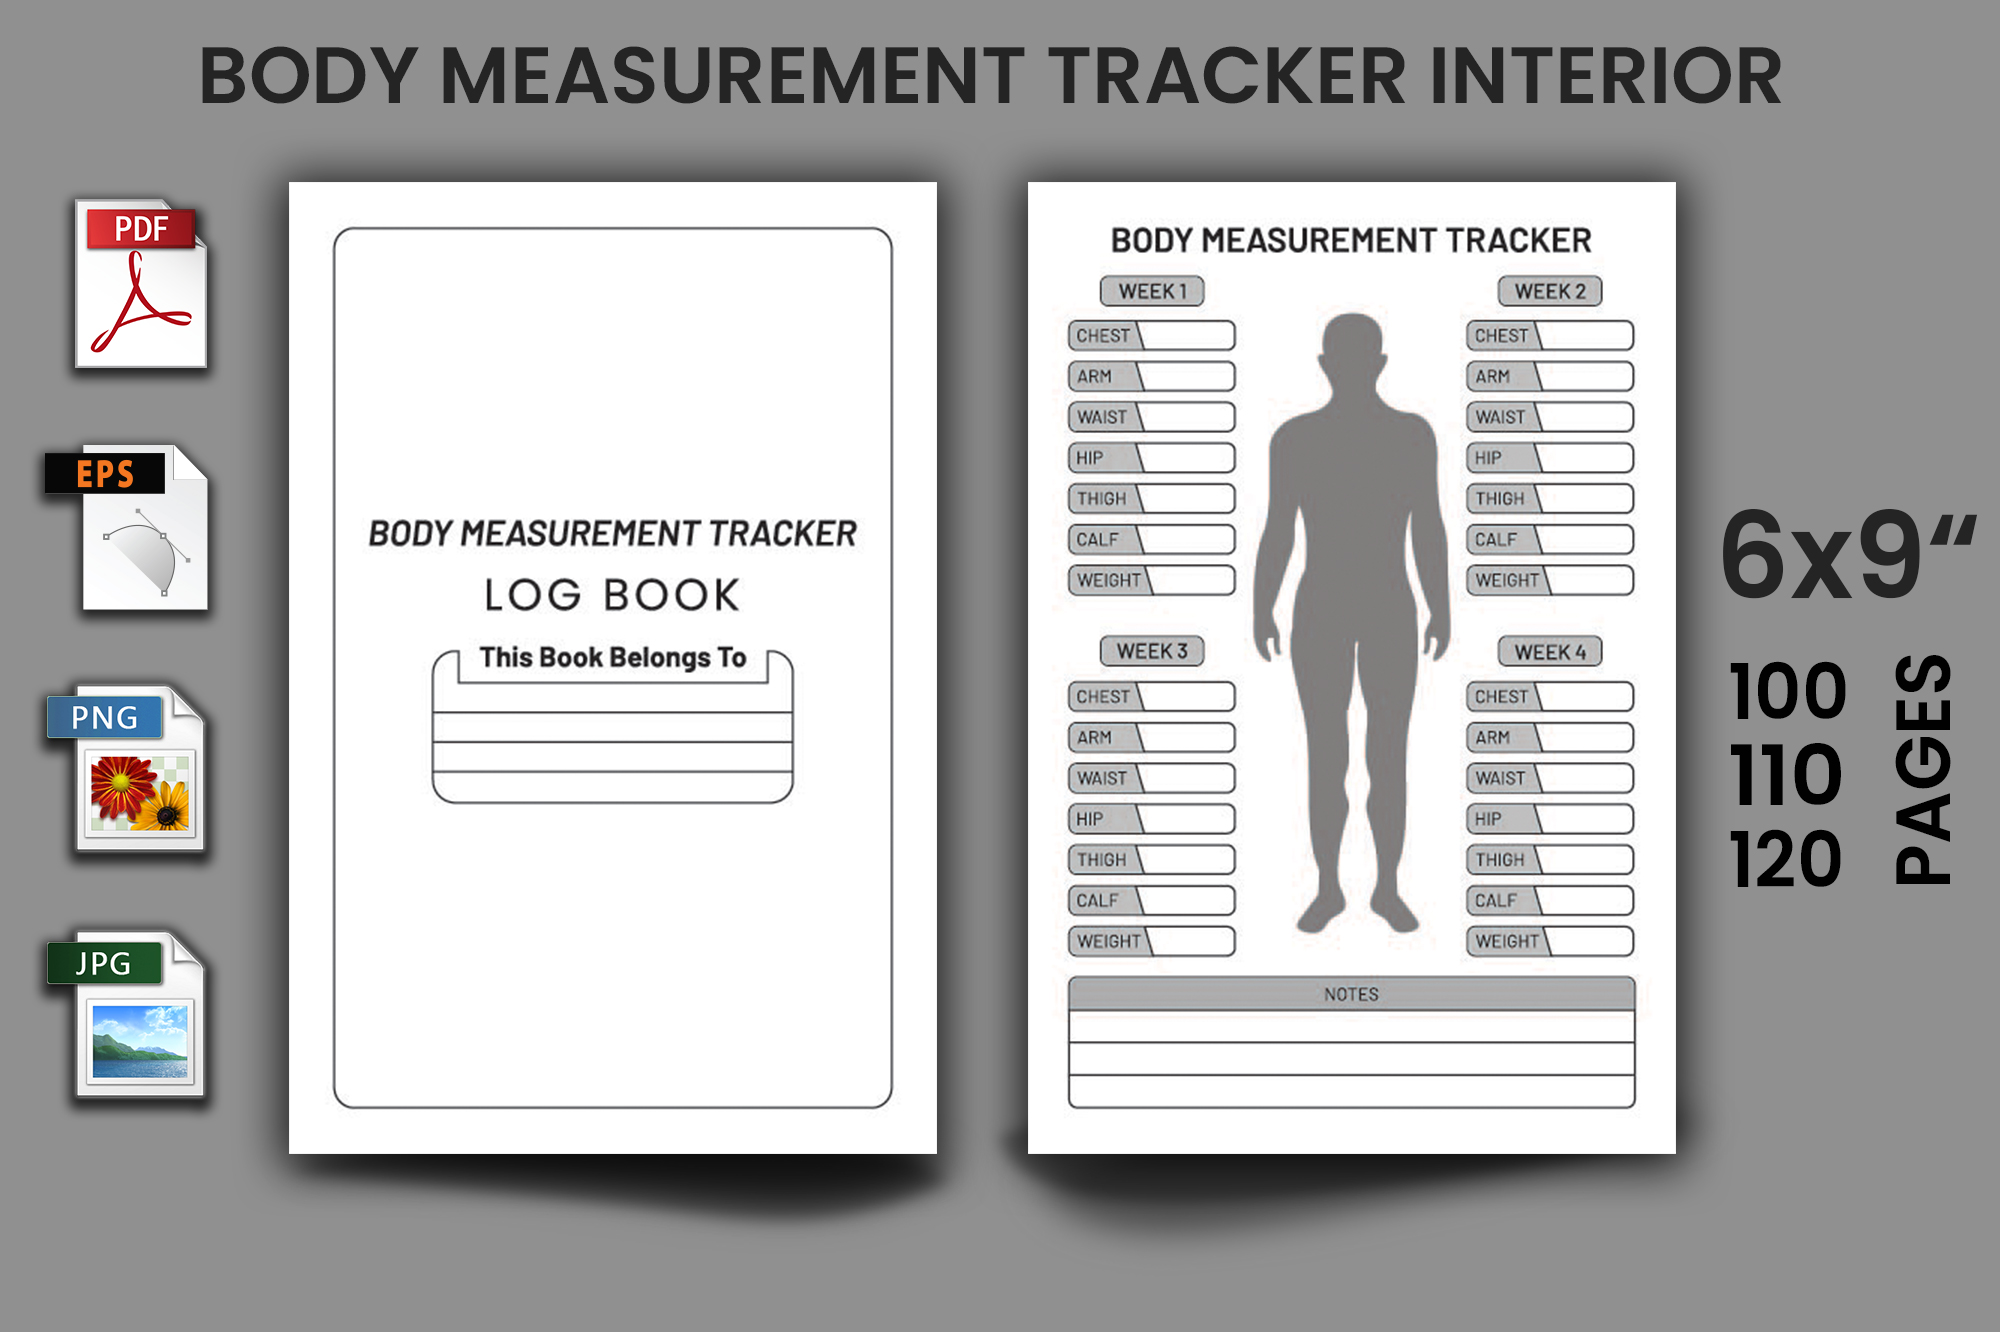 The body measurement tracker is shown with instructions.